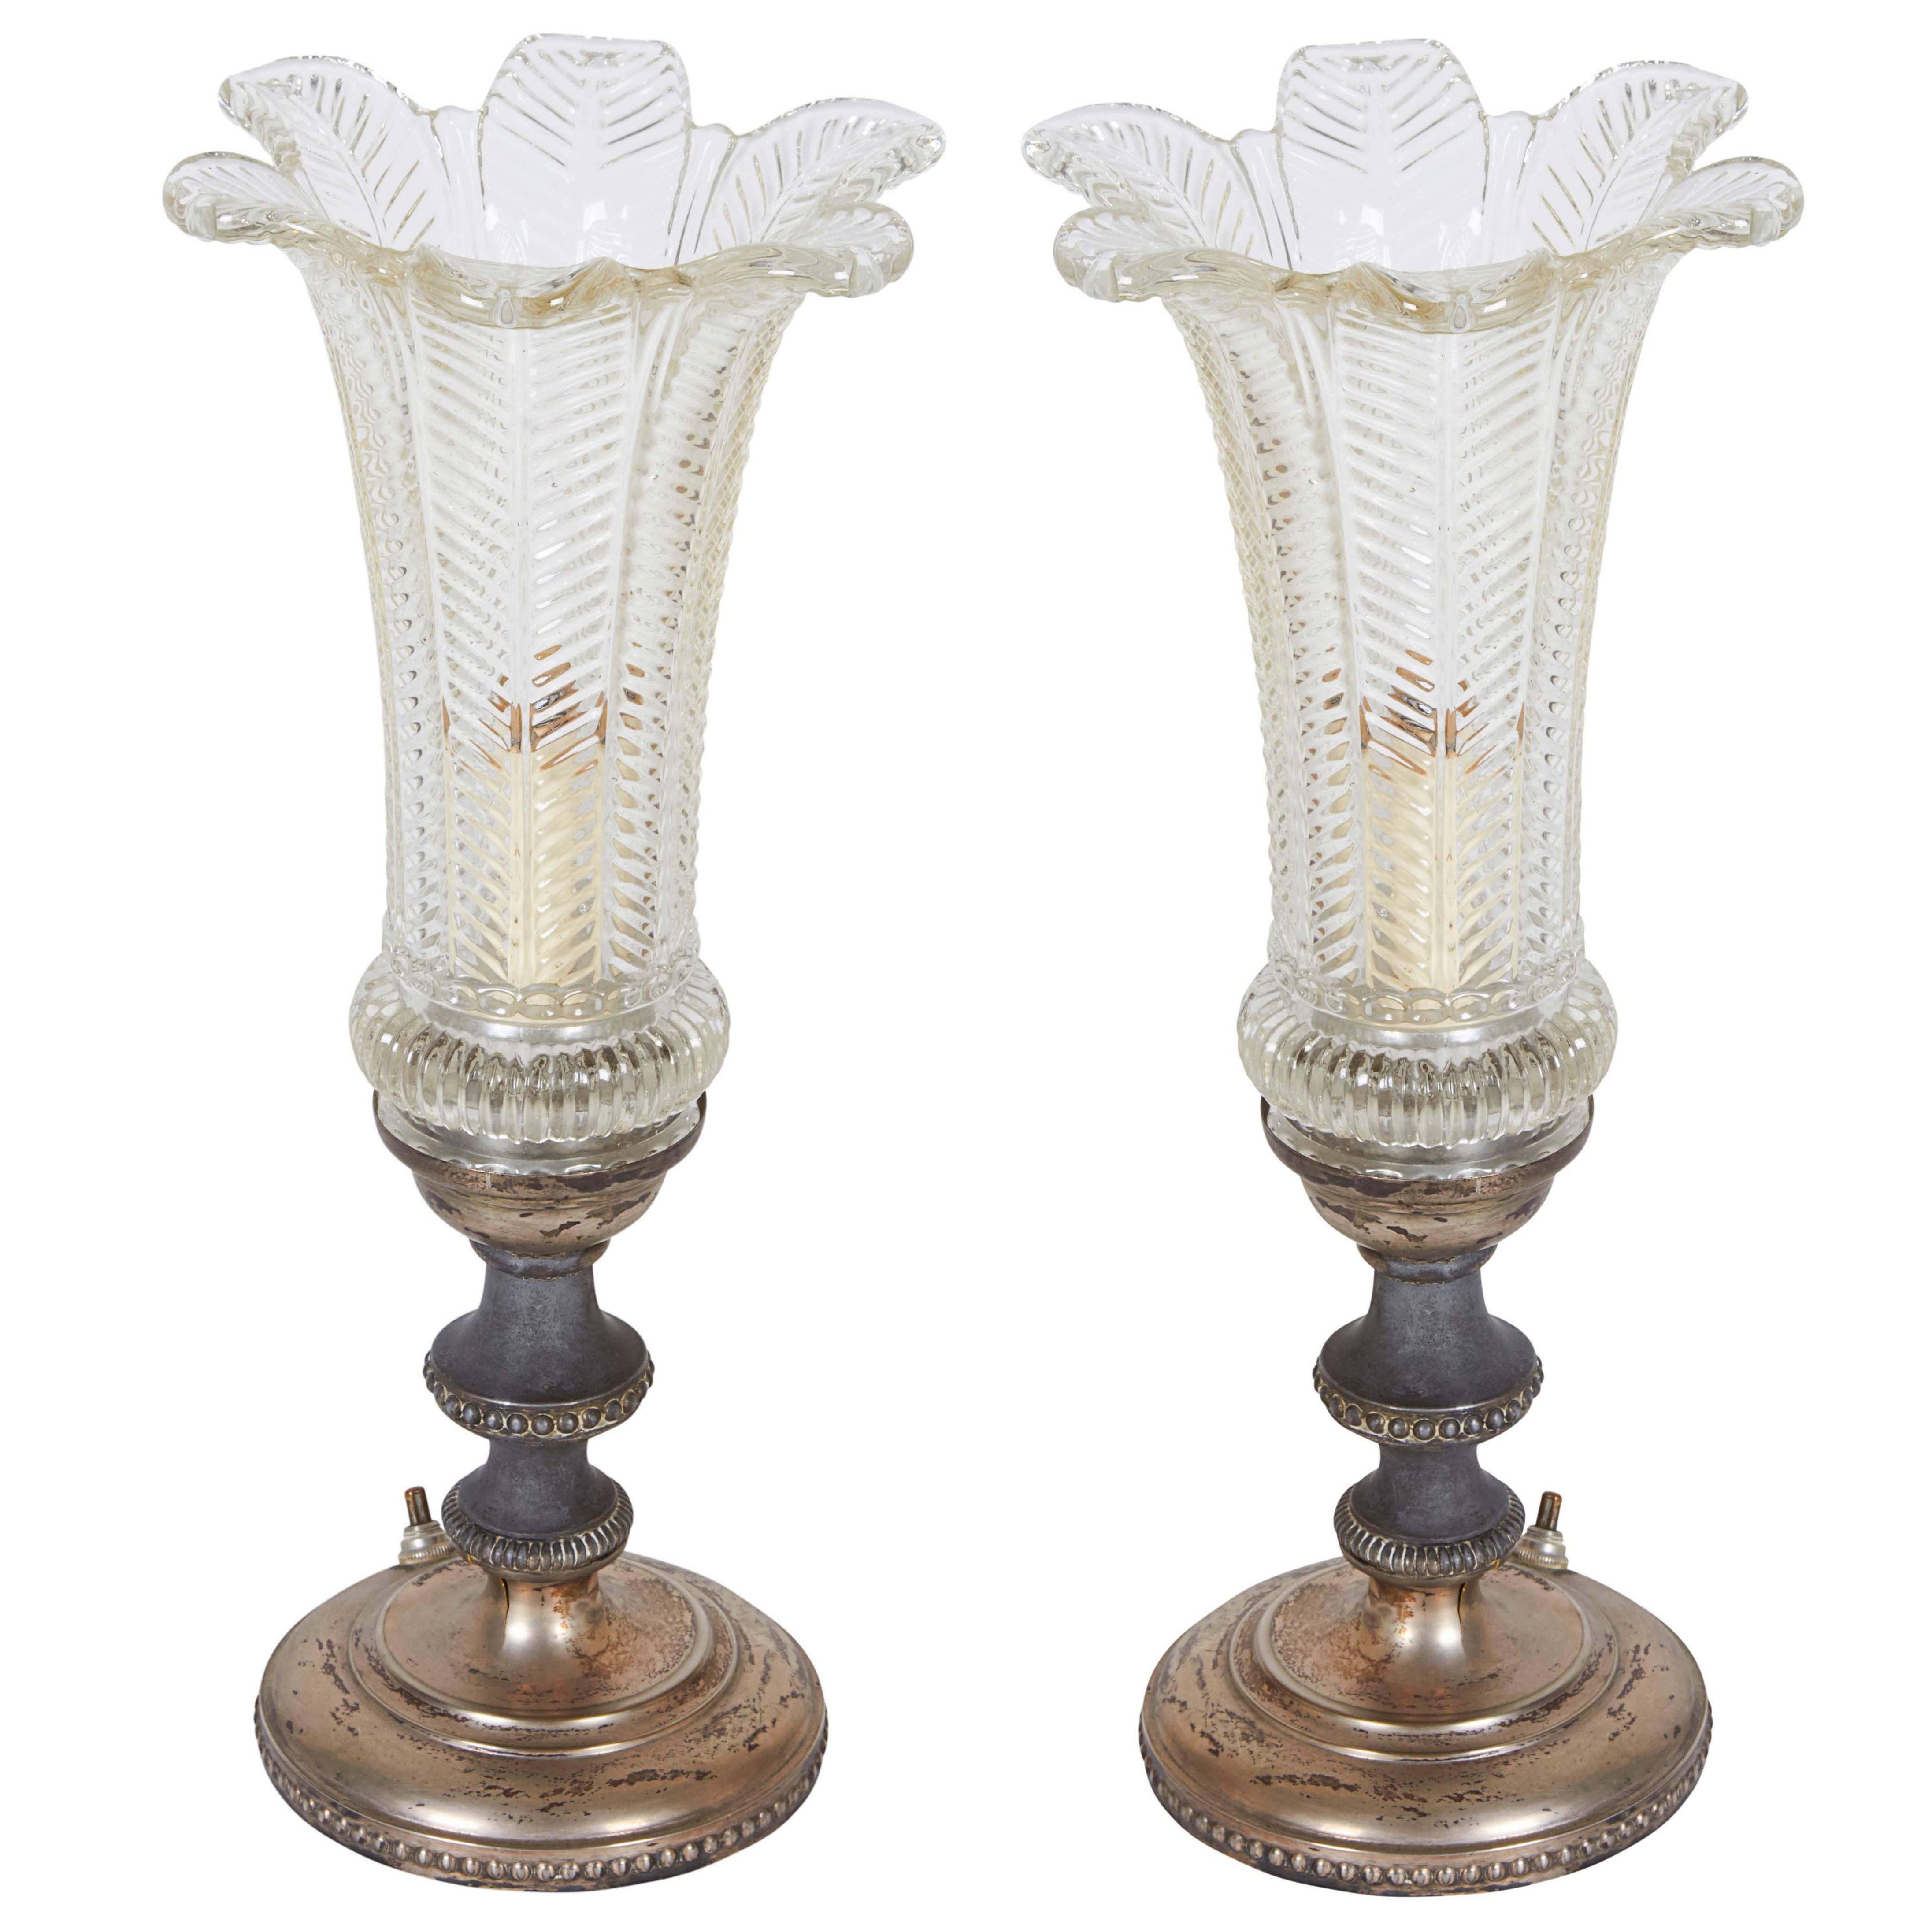 Pair of Hollywood Regency Candlestick Lamps with Floral Glass Hurricane Shades